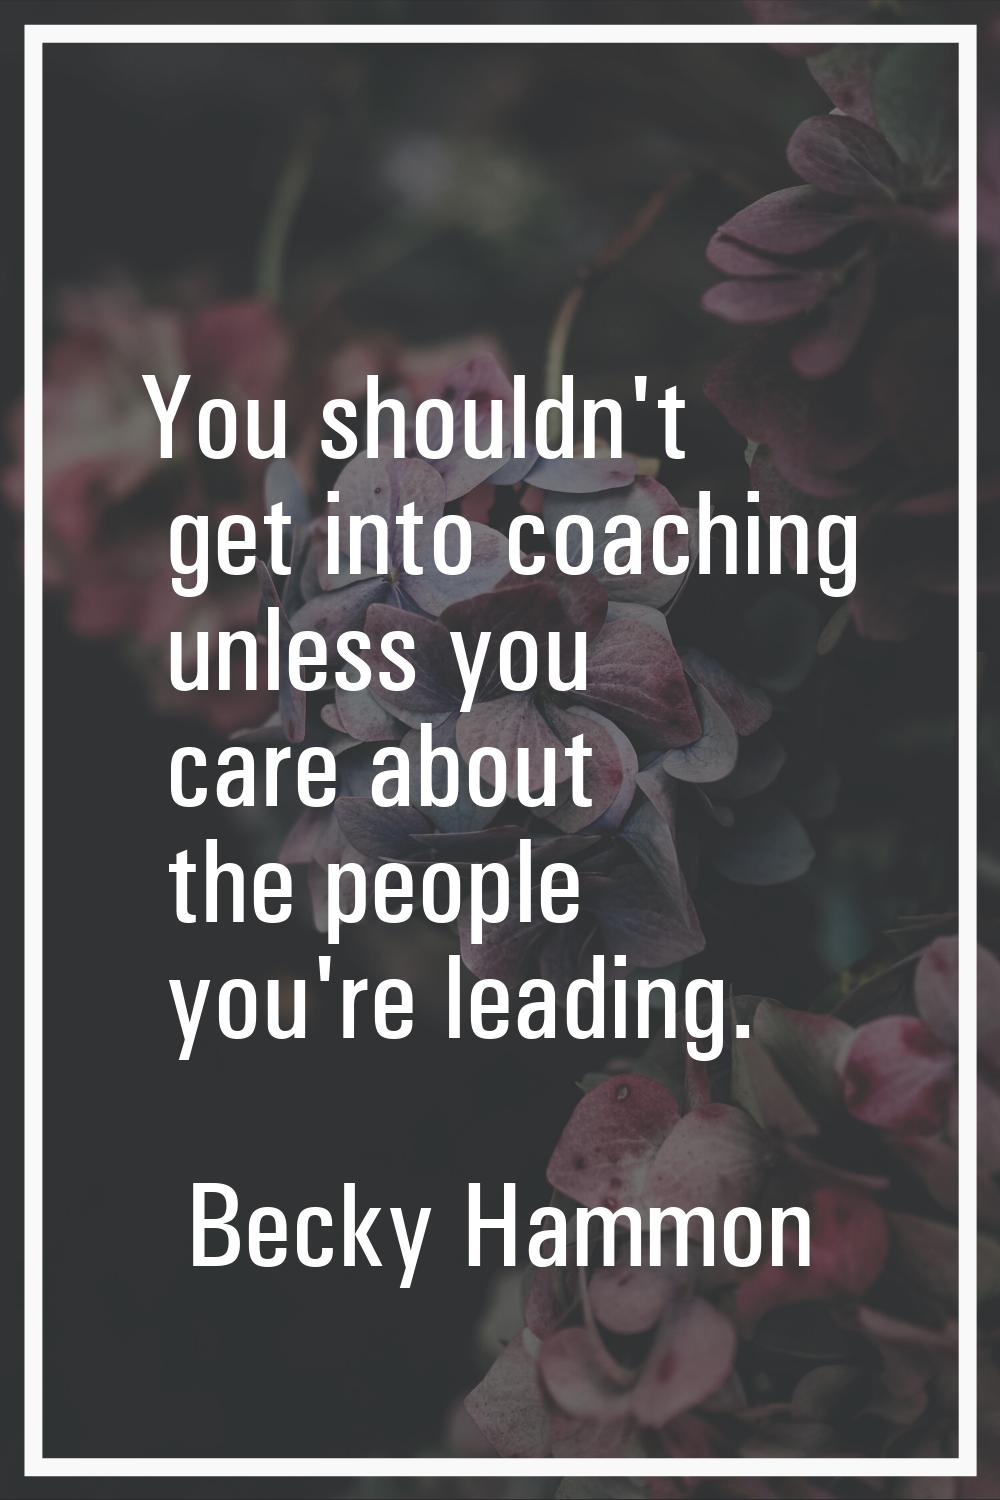 You shouldn't get into coaching unless you care about the people you're leading.